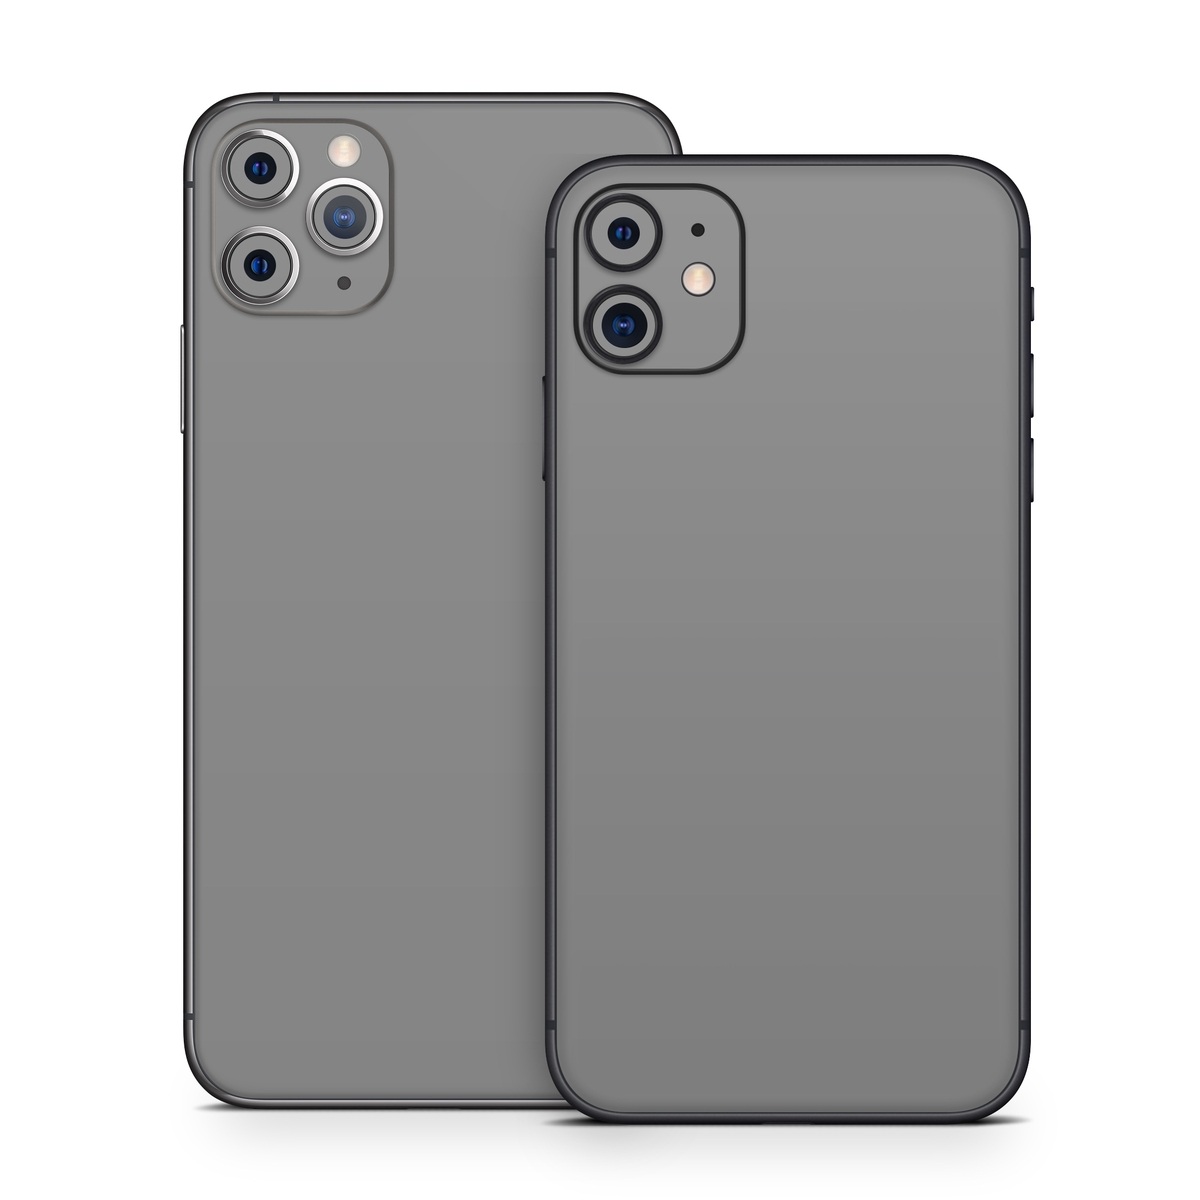 Apple iPhone 11 Skin - Solid State Grey (Image 1)